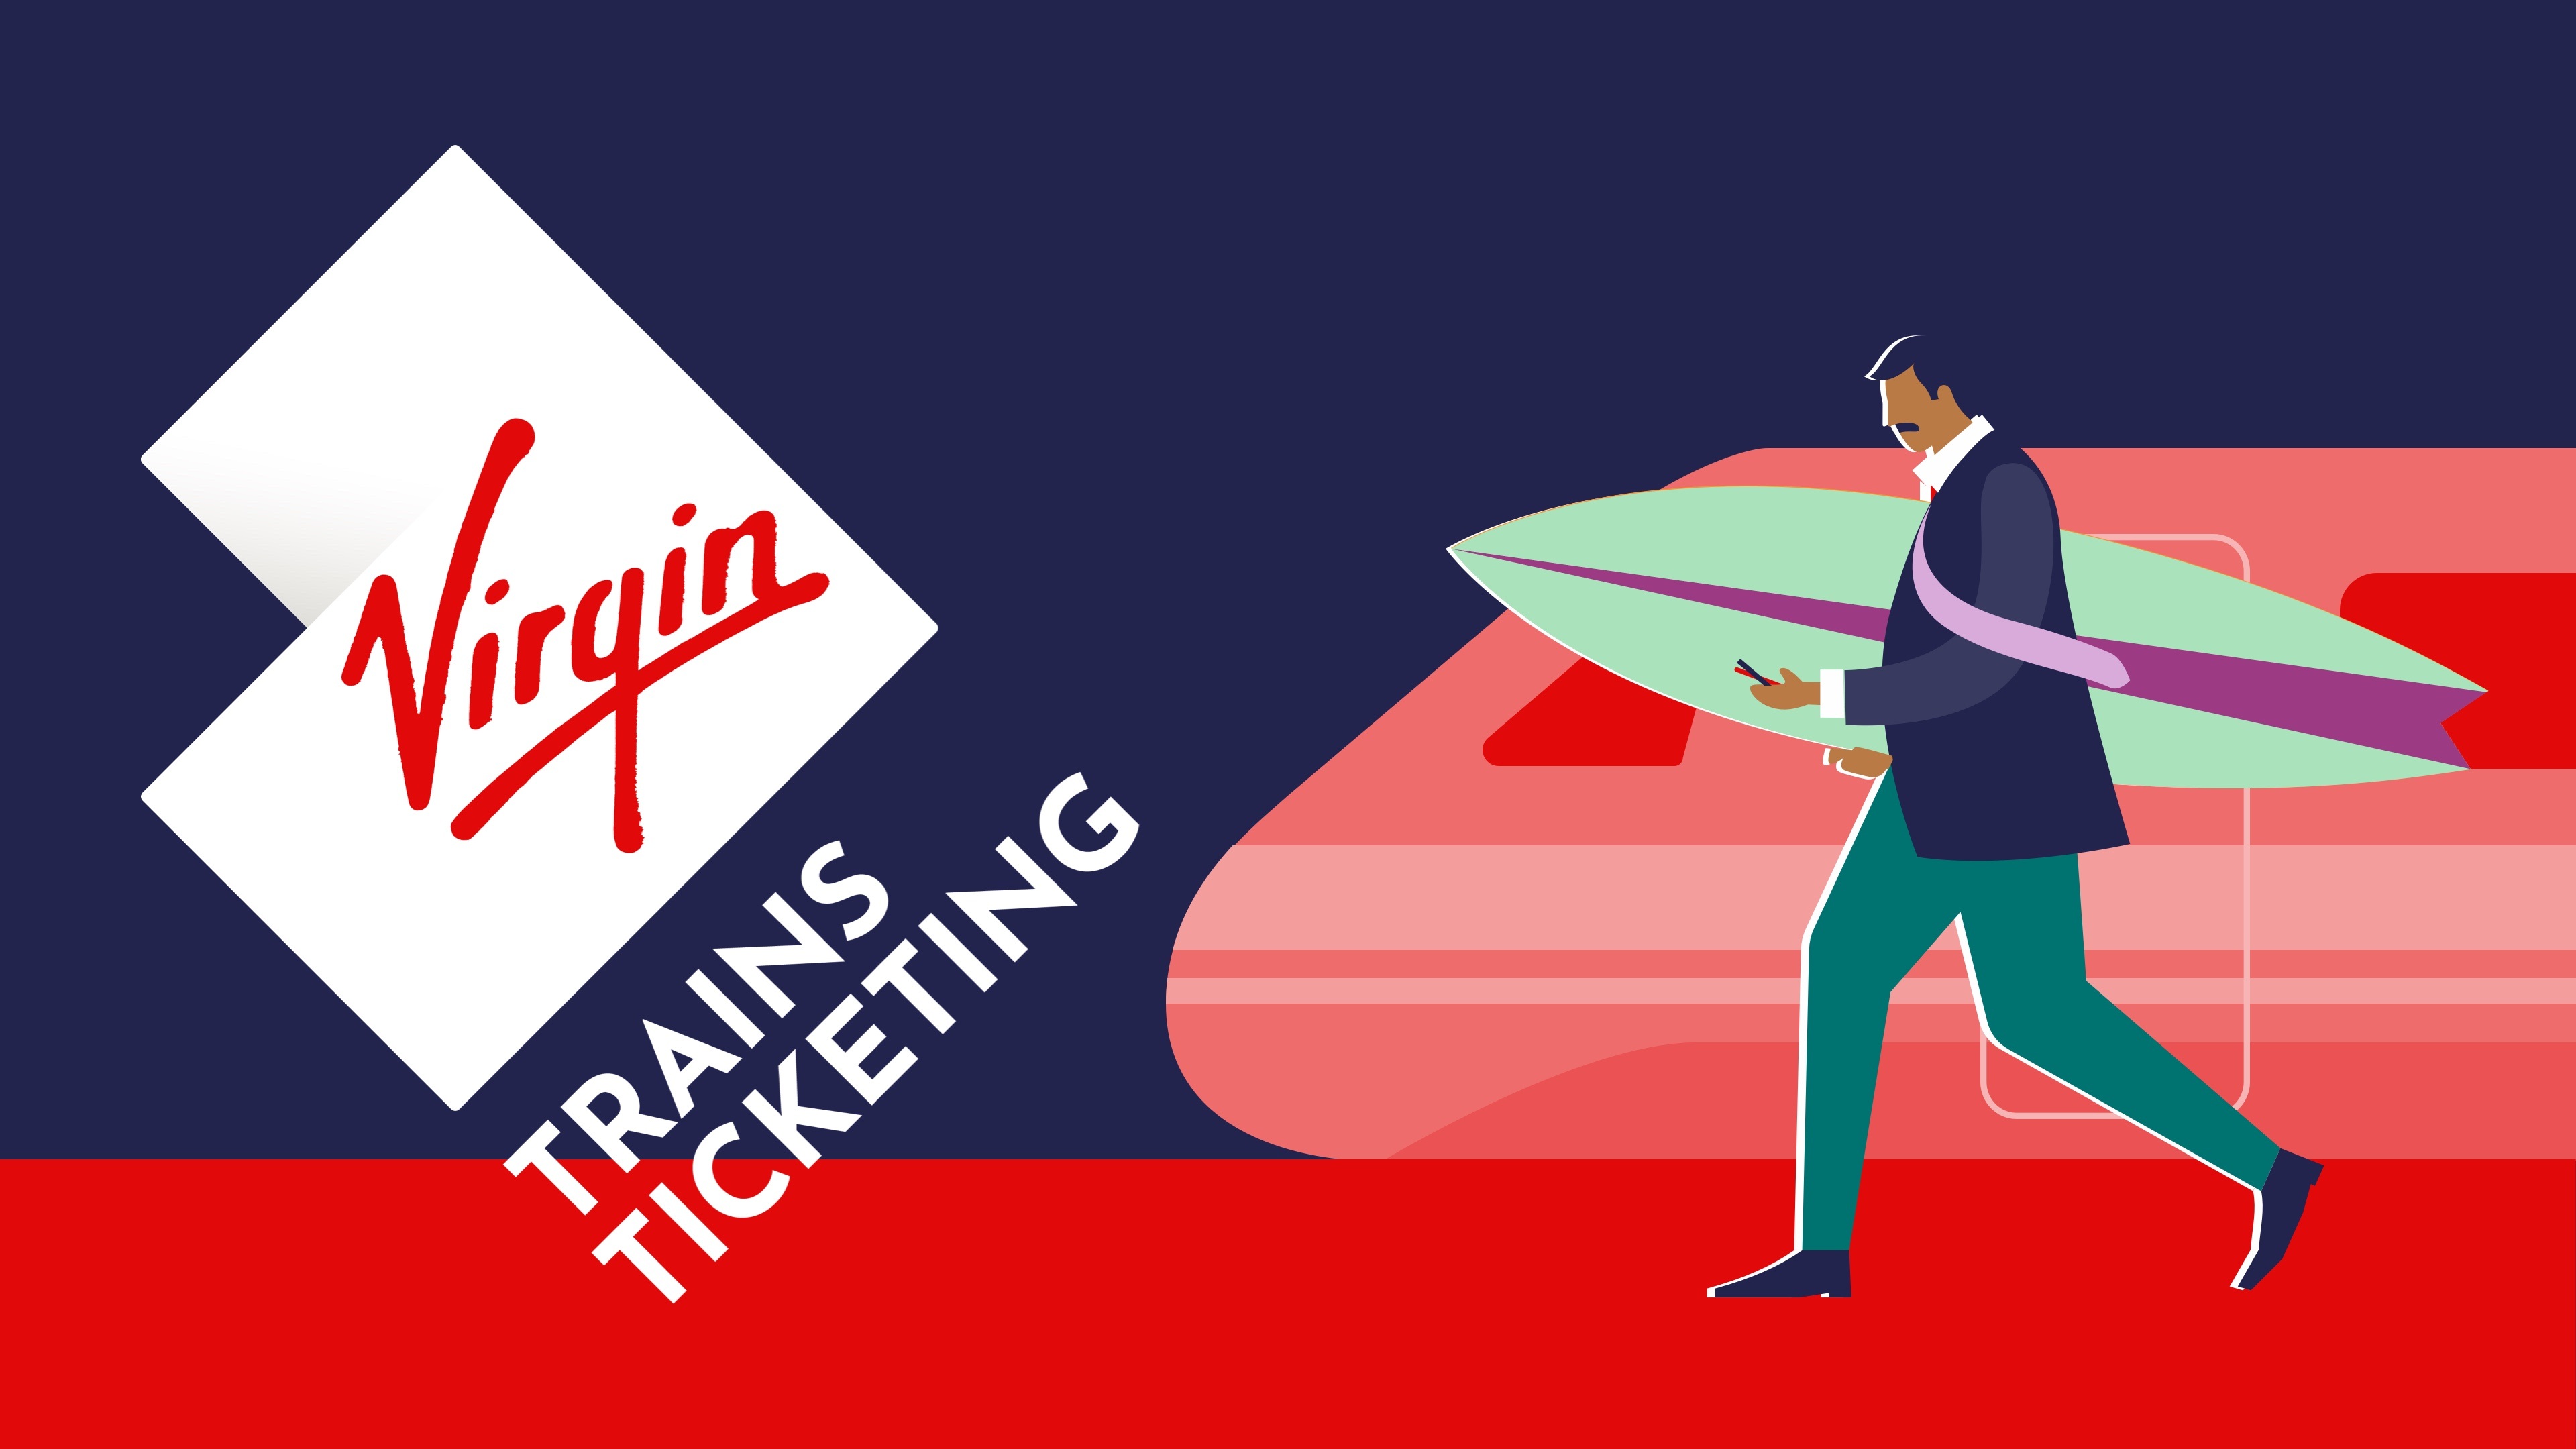 Listing image for the VTT case study showing the Virgin Trains Ticketing Logo and an illustration of a commuter with a surfboard